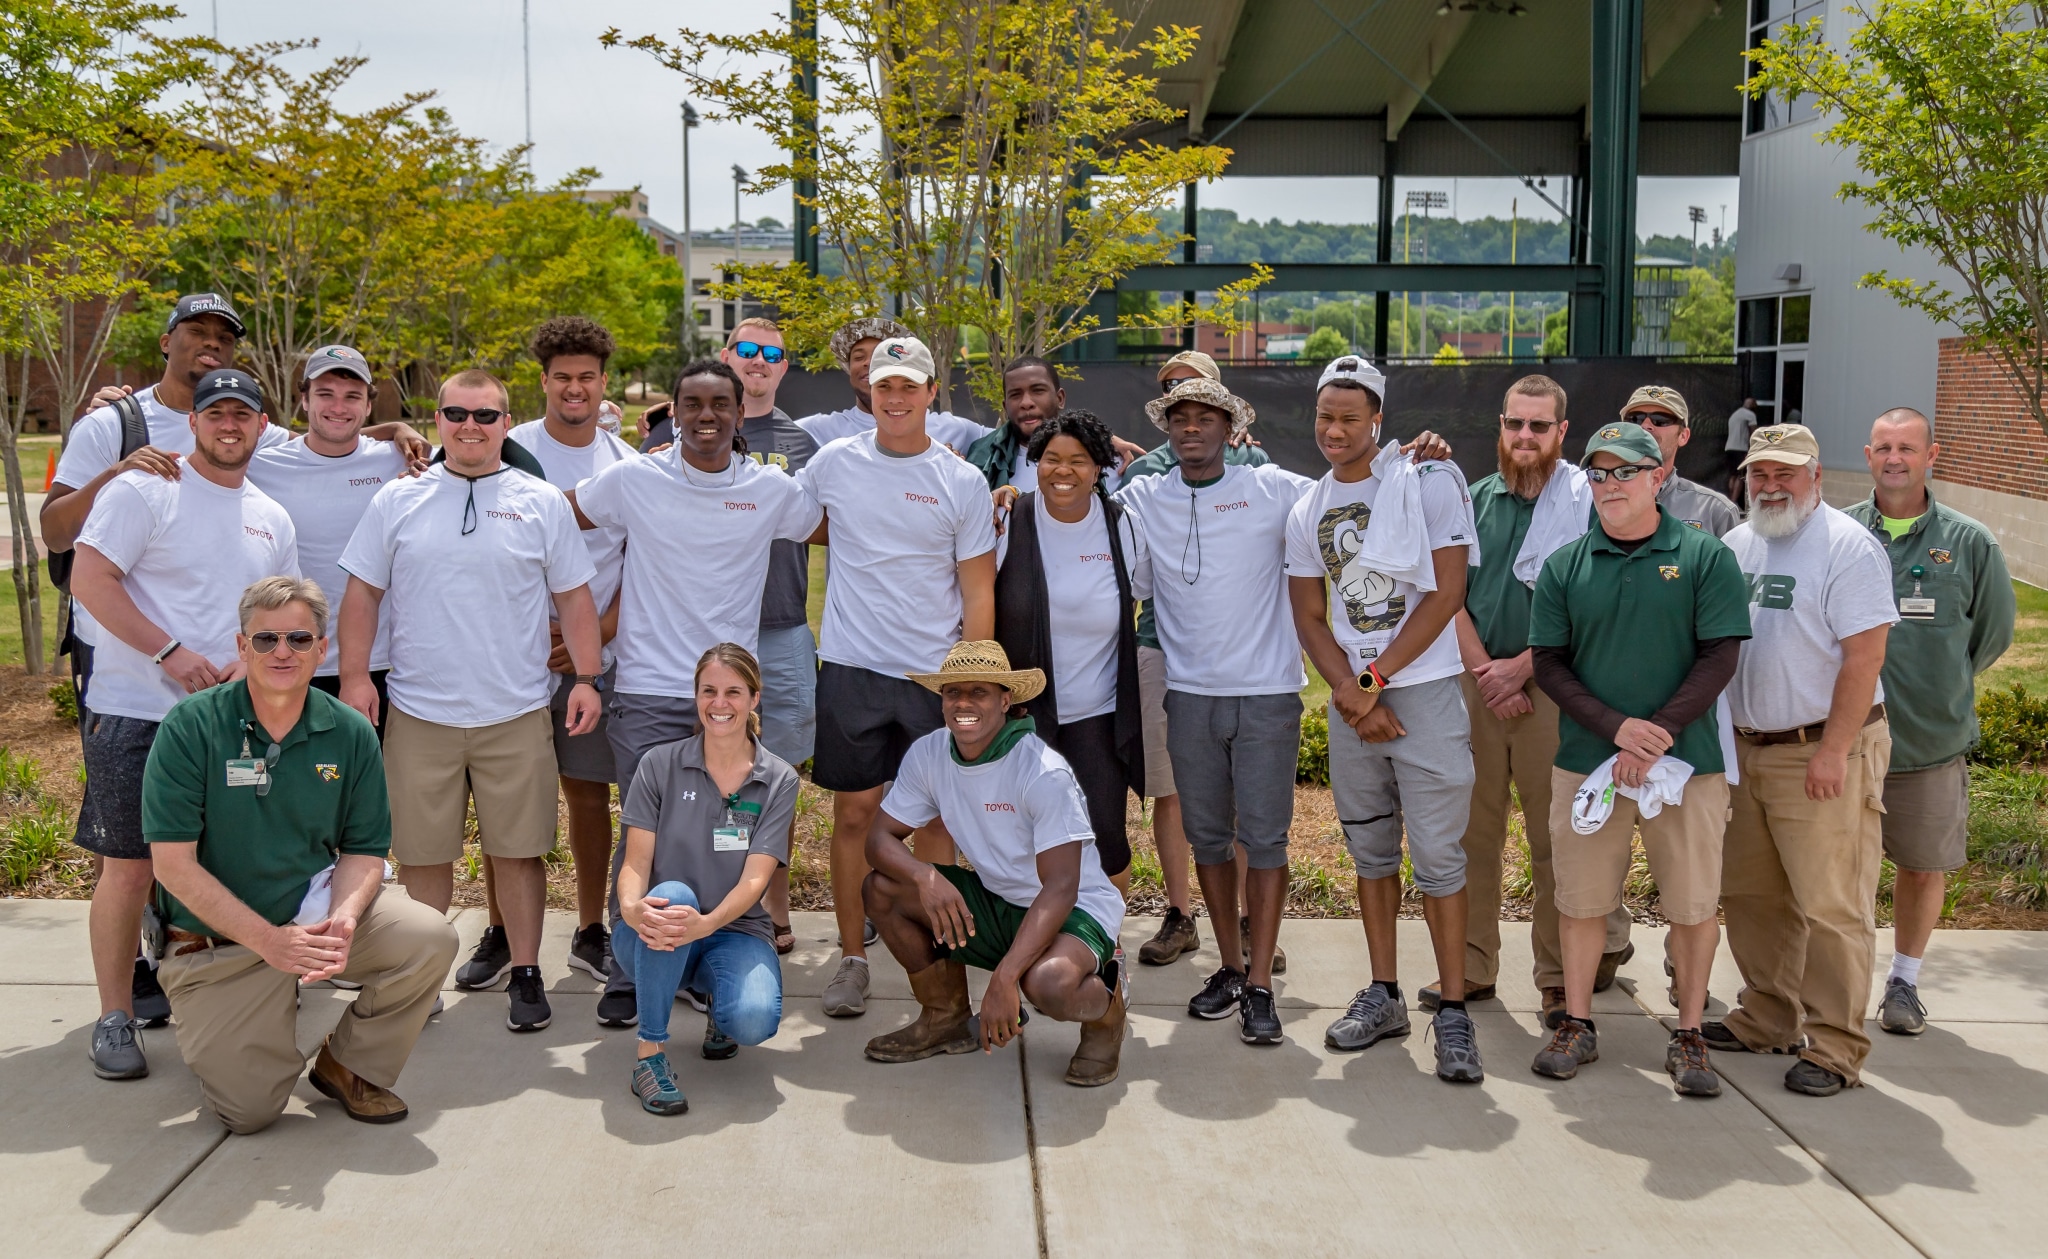 MG 2695 UAB is planting an environmentally conscious future. Learn how the campus’s more than 4,000 trees are improving Birmingham